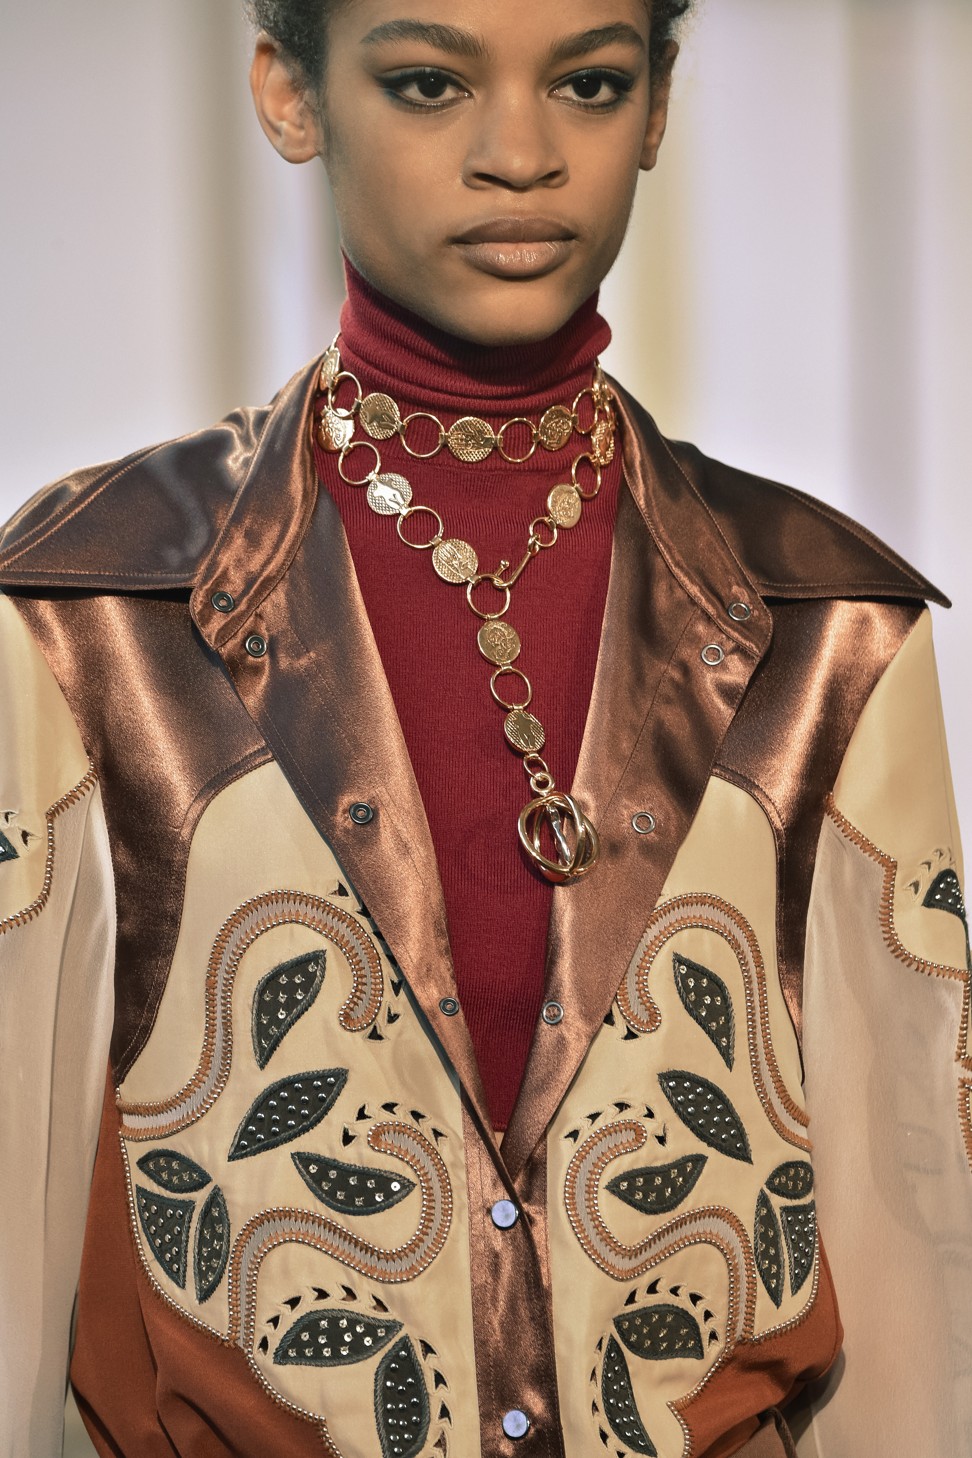 Another look from Chloé’s autumn/winter 2018 collection. There is sharp contrast, a bit of masculine femininity in the design of the embroidered top, and the bold chain is a perfect match.